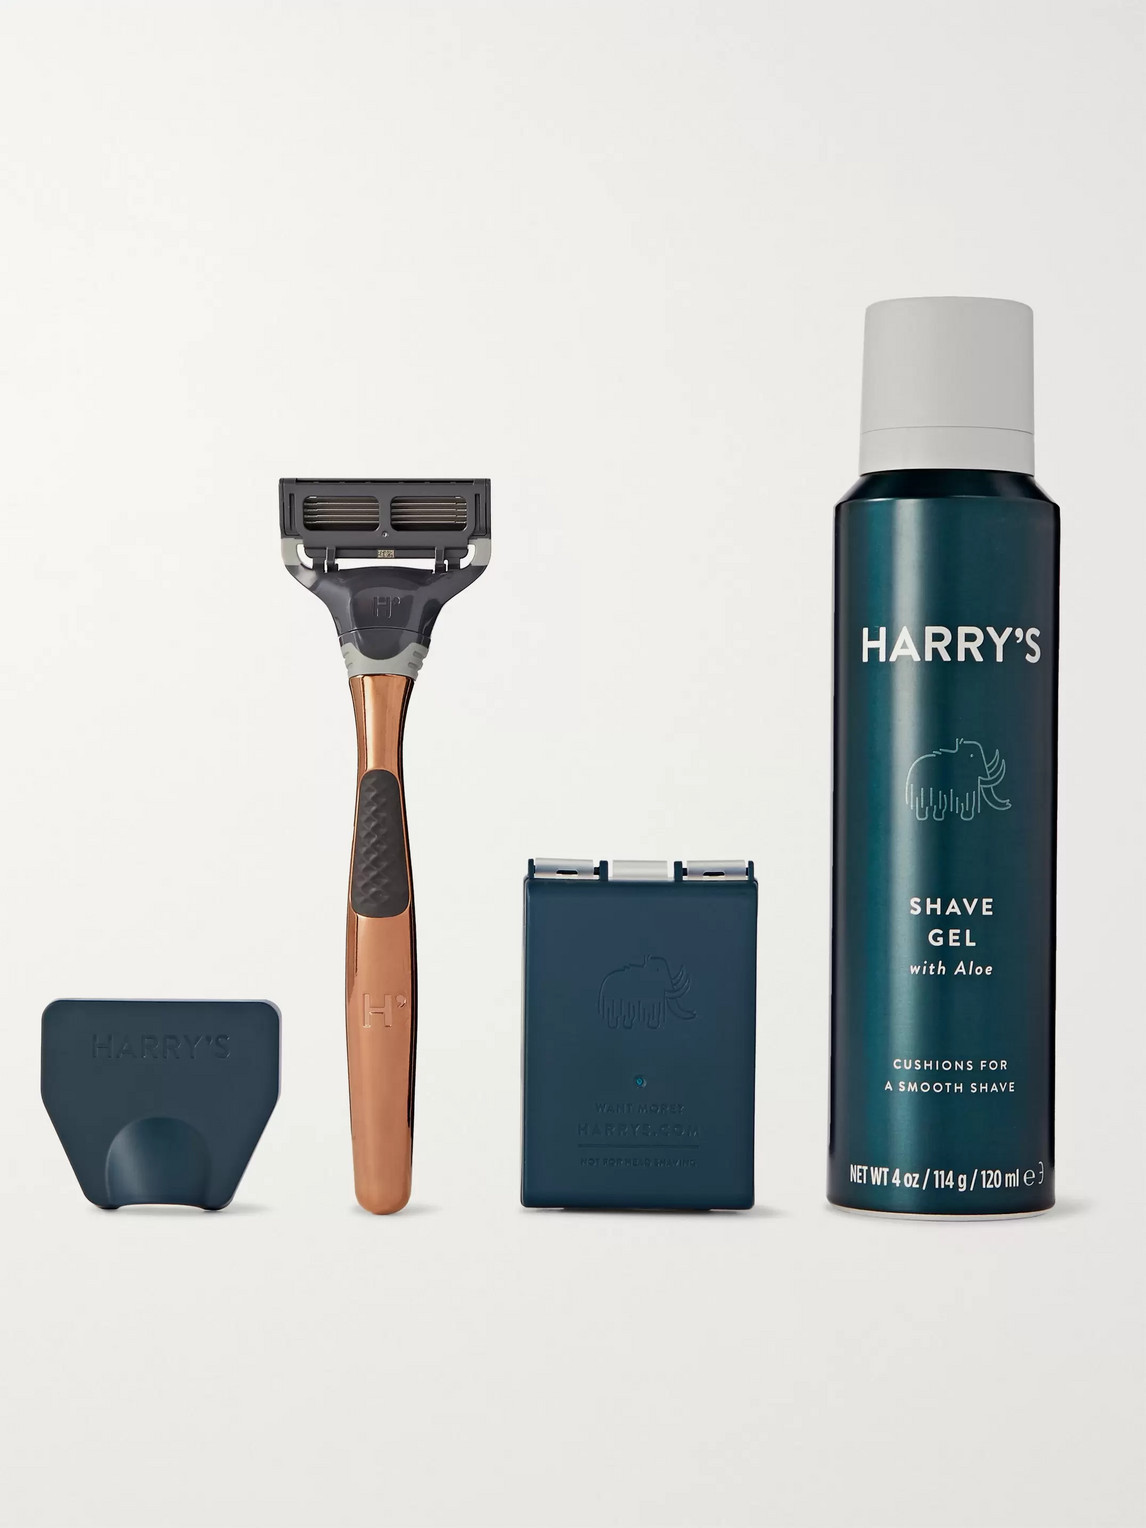 Harry's Copper Winston Shave Set In Colorless